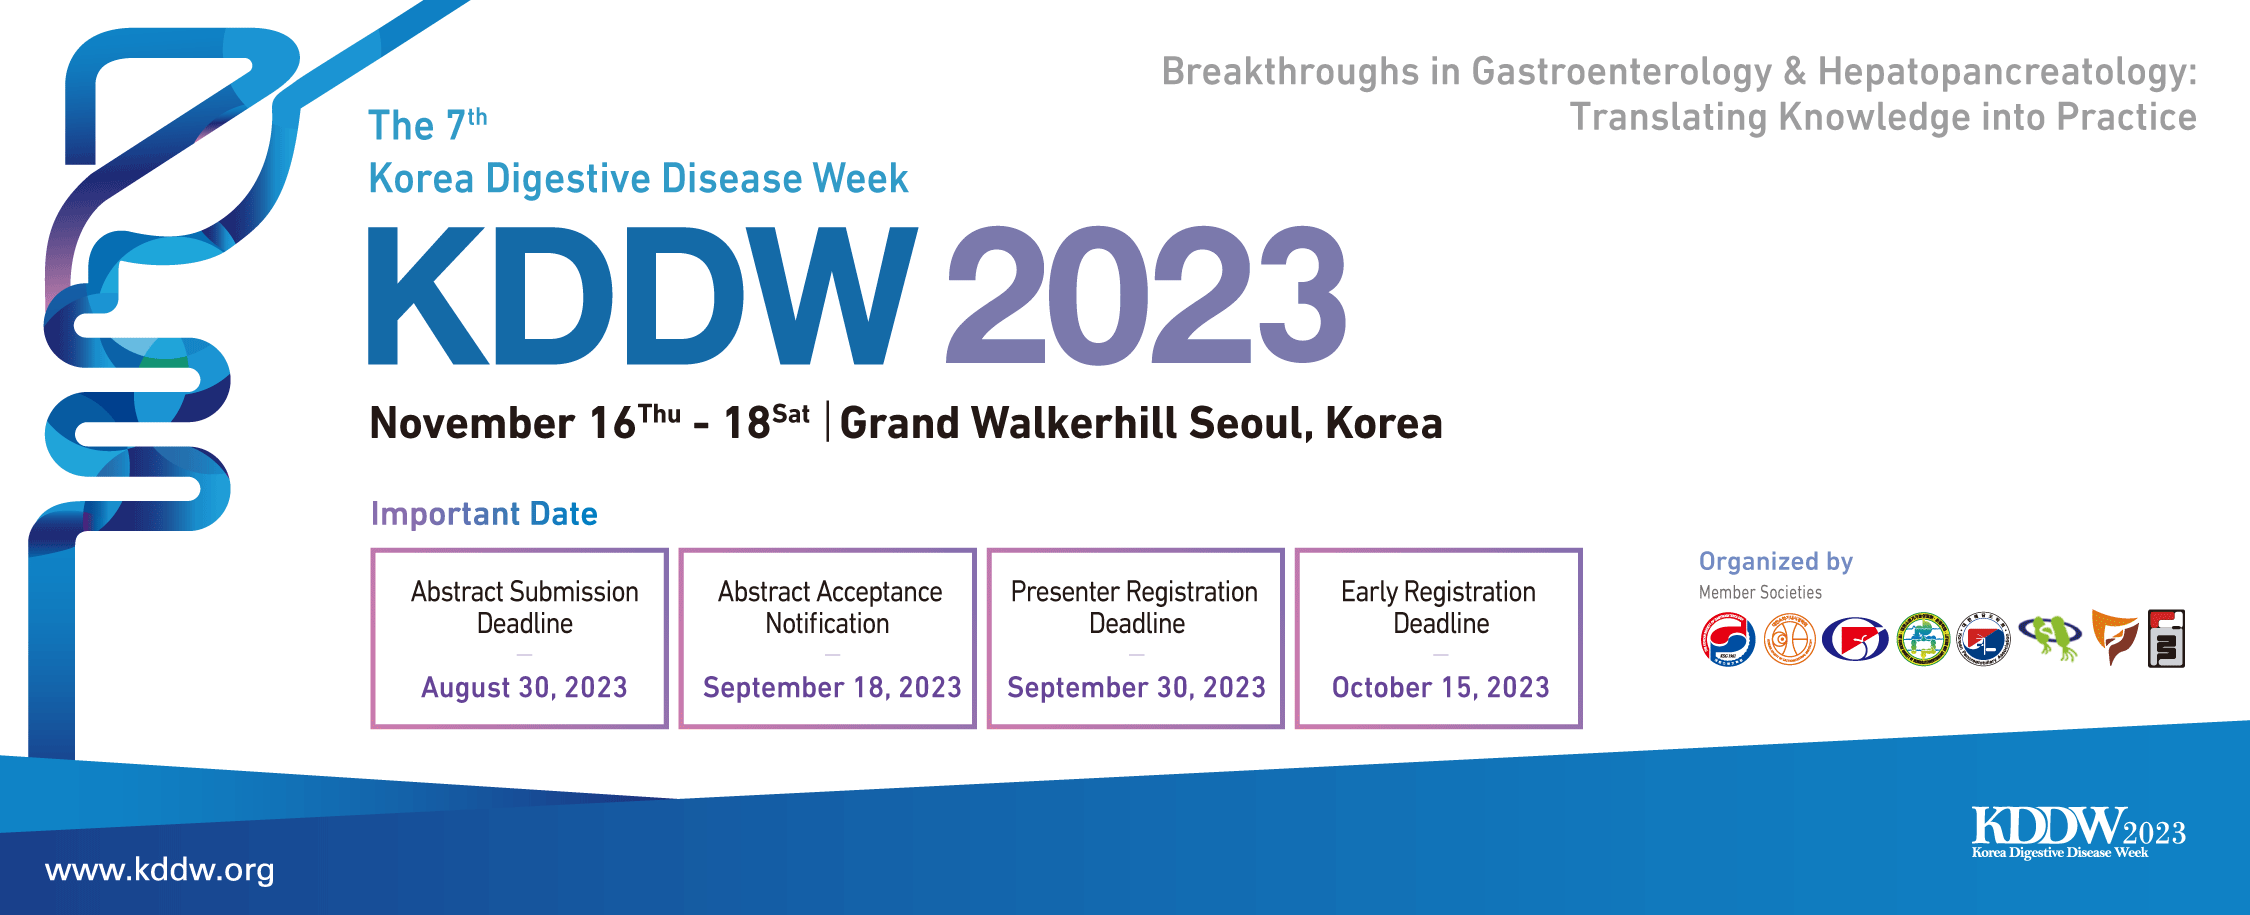 the Korea Digestive Disease Week 2023 (for short “KDDW 2023”) will be held from November 16 (Thu) to 18 (Sat), 2023 at the Grand Walkerhill Seoul, in Seoul, Korea.